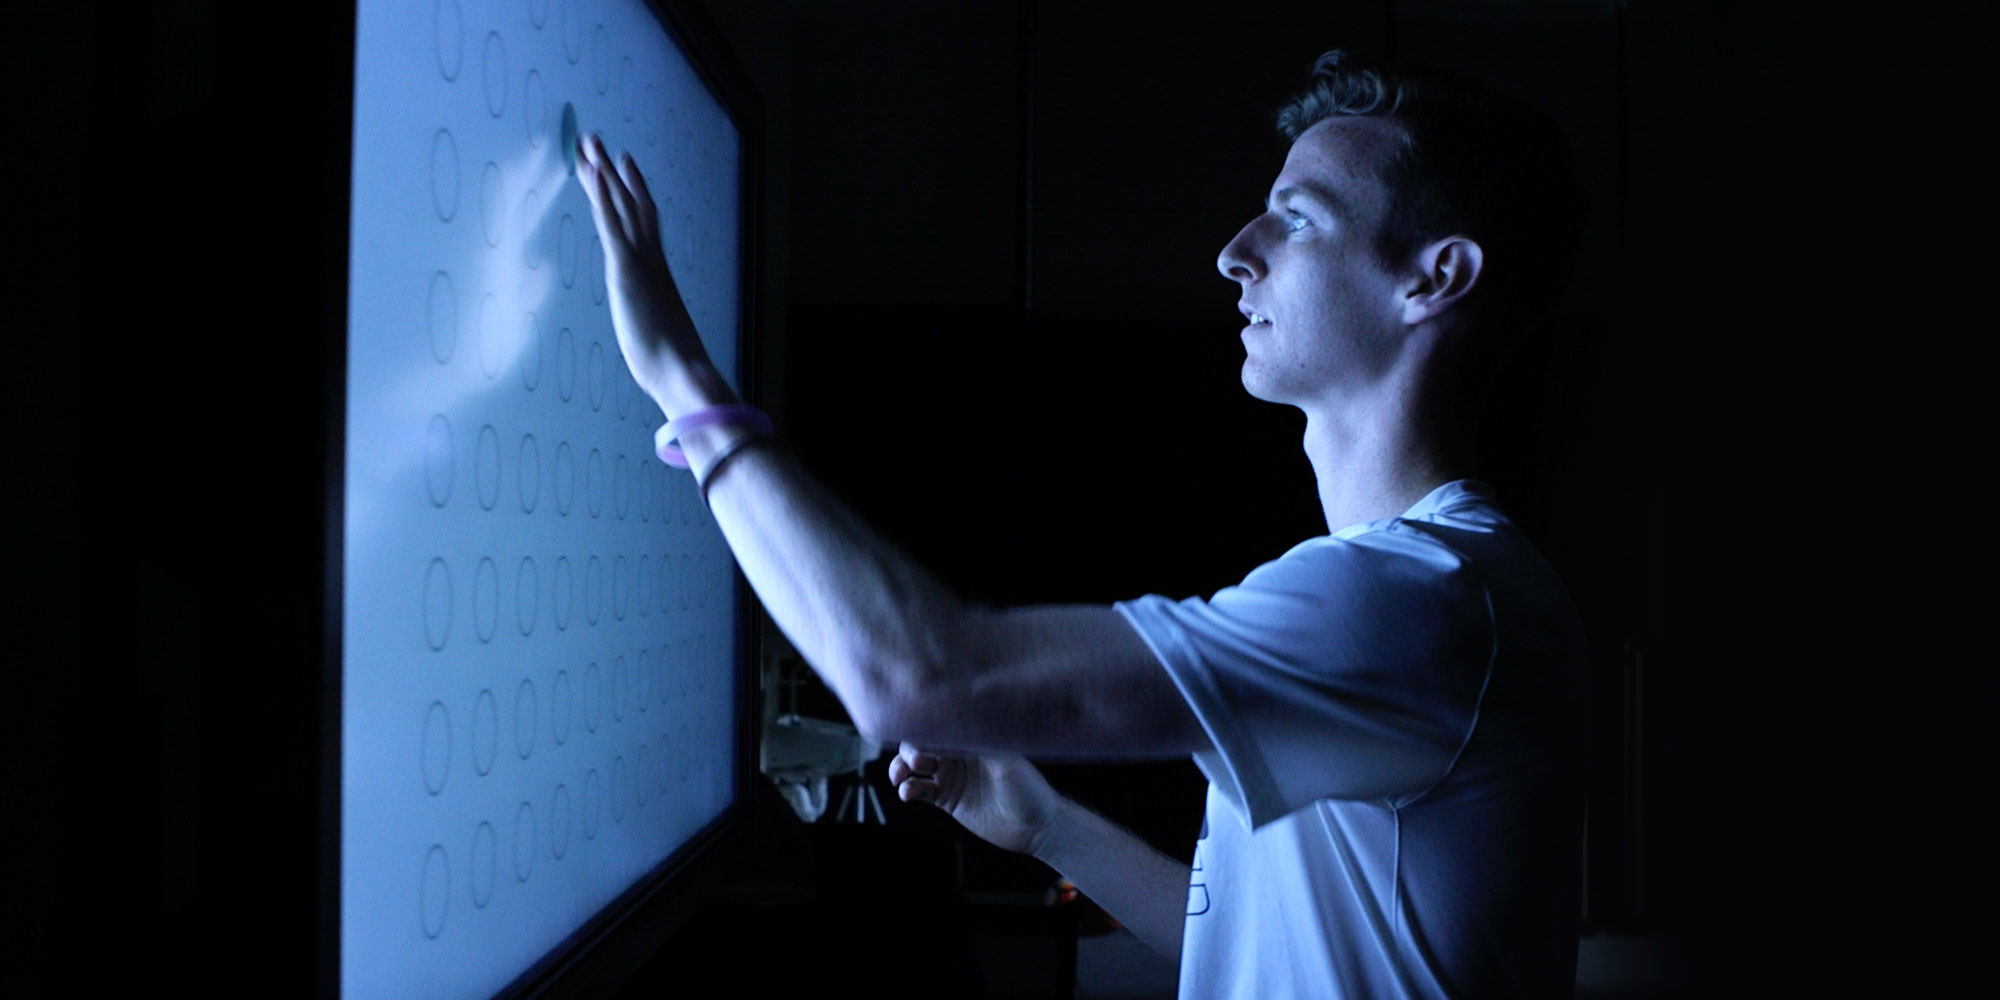 A man taps circles as the light up during a sports vision test